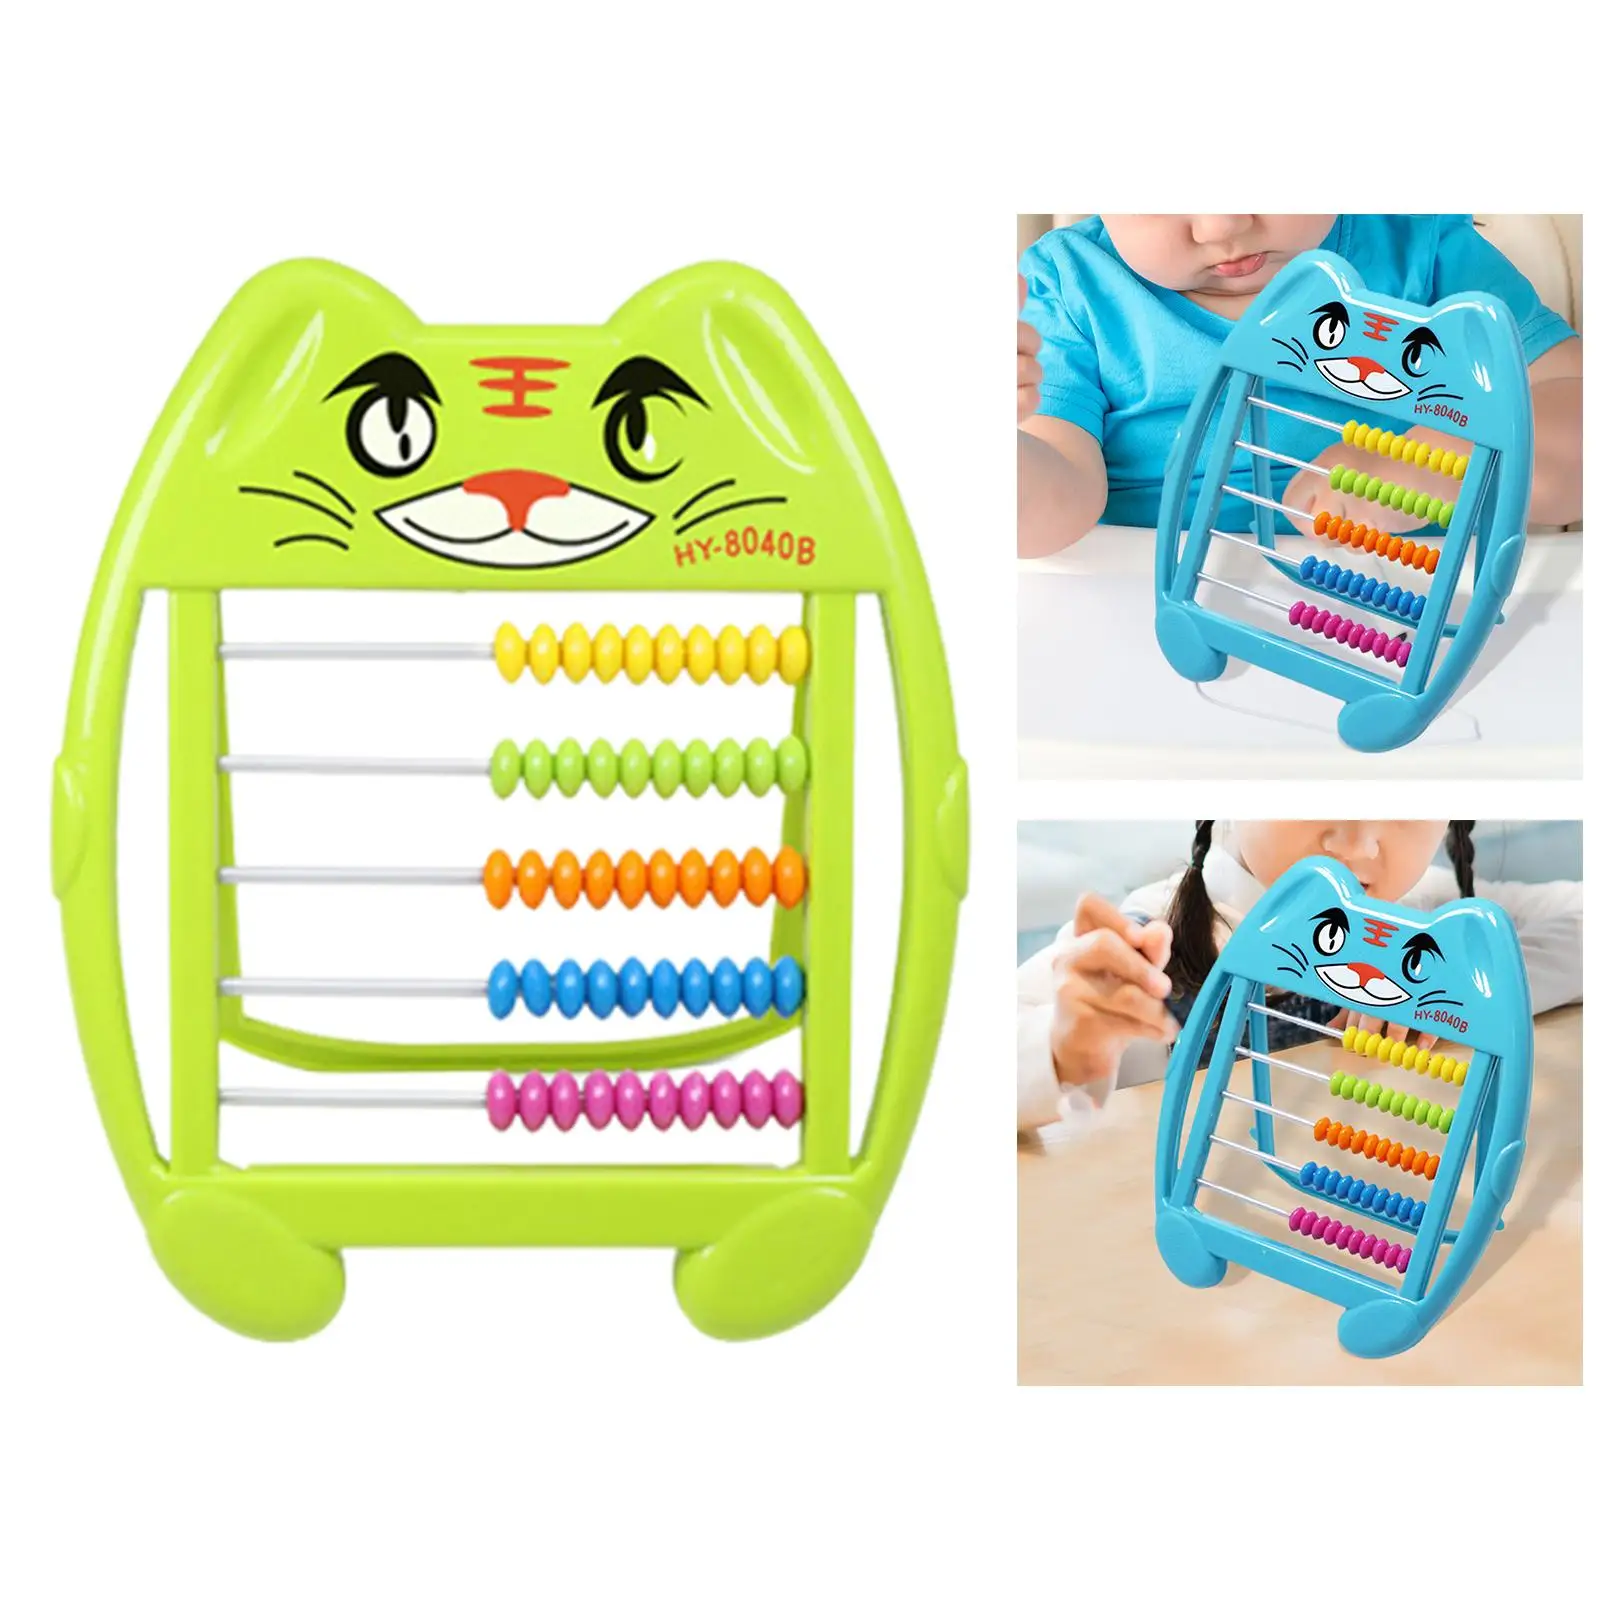 Educational Abacus 5 Row Frame Abacus Educational Counting Frames Toy for Preschool Toddlers Children Girls Birthday Gifts